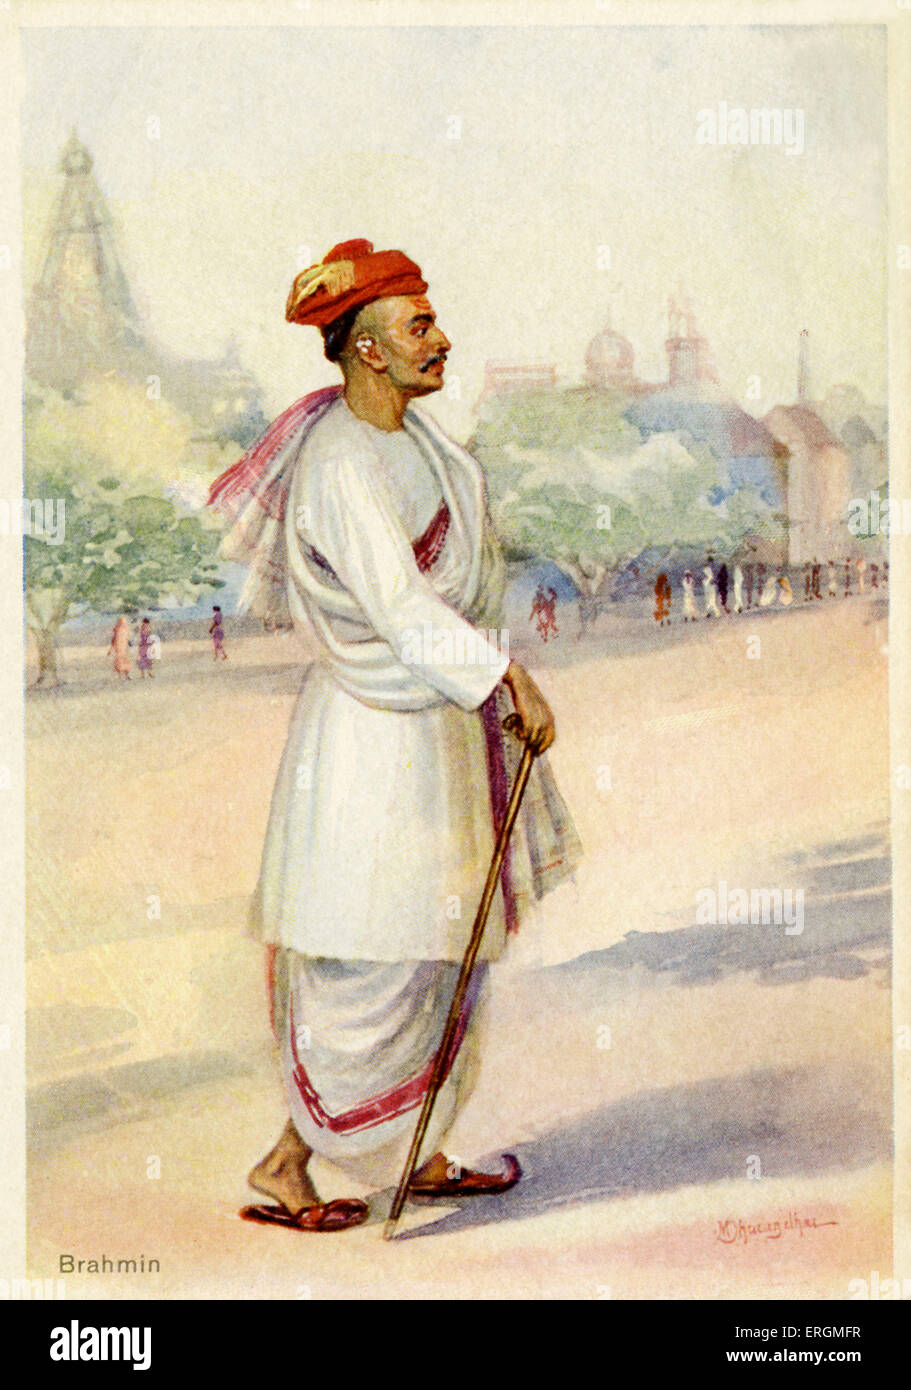 Portrait of a Brahmin. Illustration from early 20th century. Stock Photo